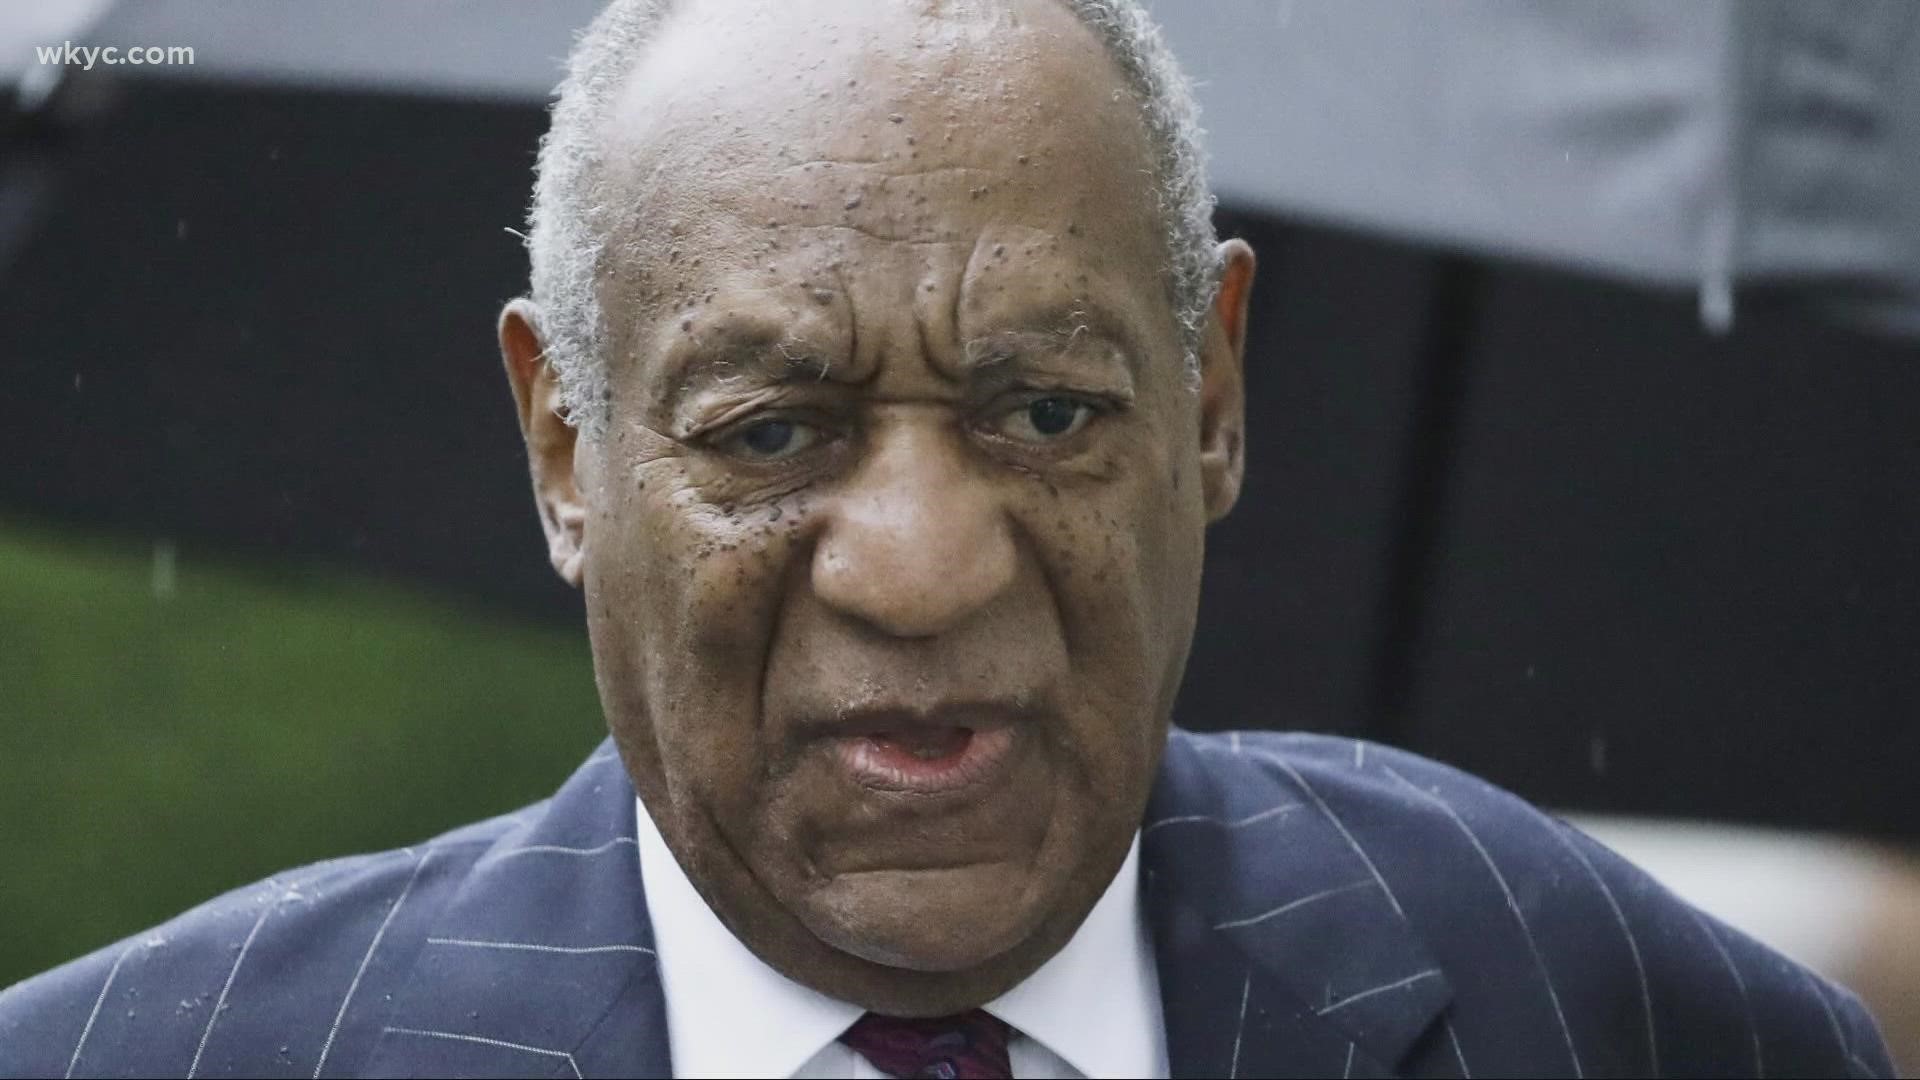 The request was a long-shot bid after the Pennsylvania Supreme Court last year threw out Cosby's conviction.